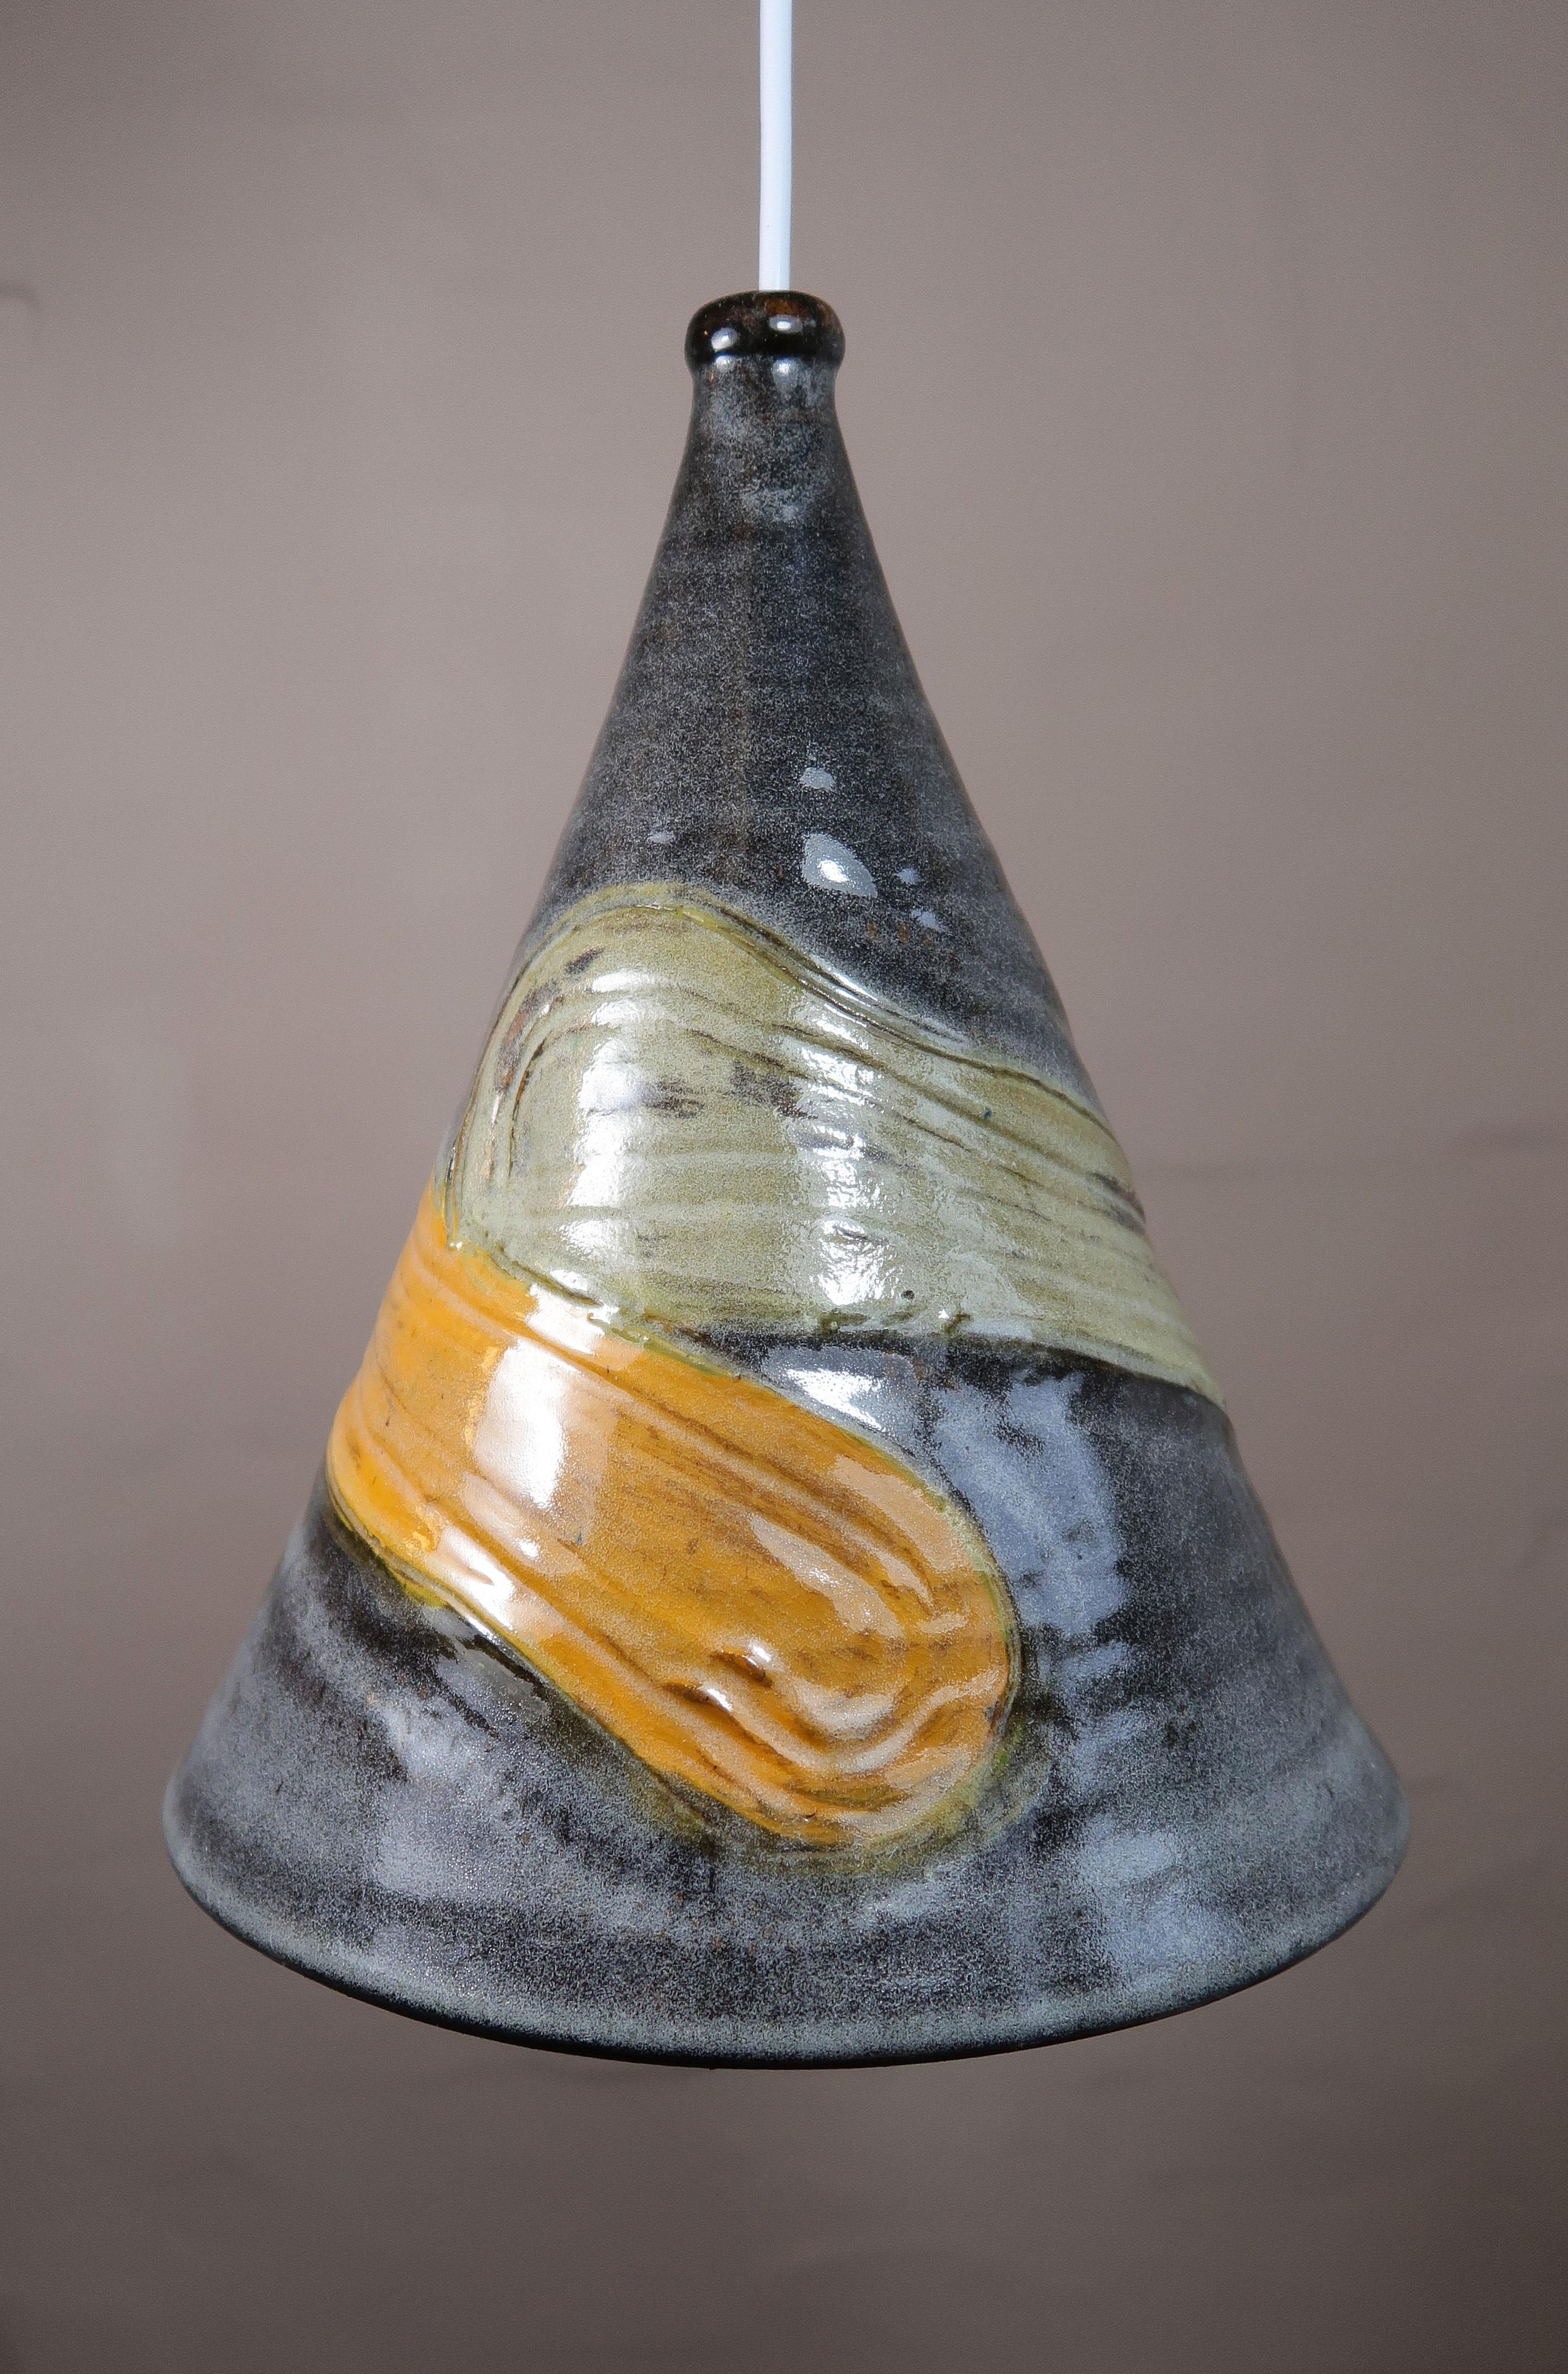 One of a kind Scandinavian Mid-Century Modern ceramic pendant designed and handmade by Marianne May - a student of Bjørn Wiinblad. Handmade organic relief pattern swirling around the center of the cone shaped ceiling lamp. Warm grey with yellow